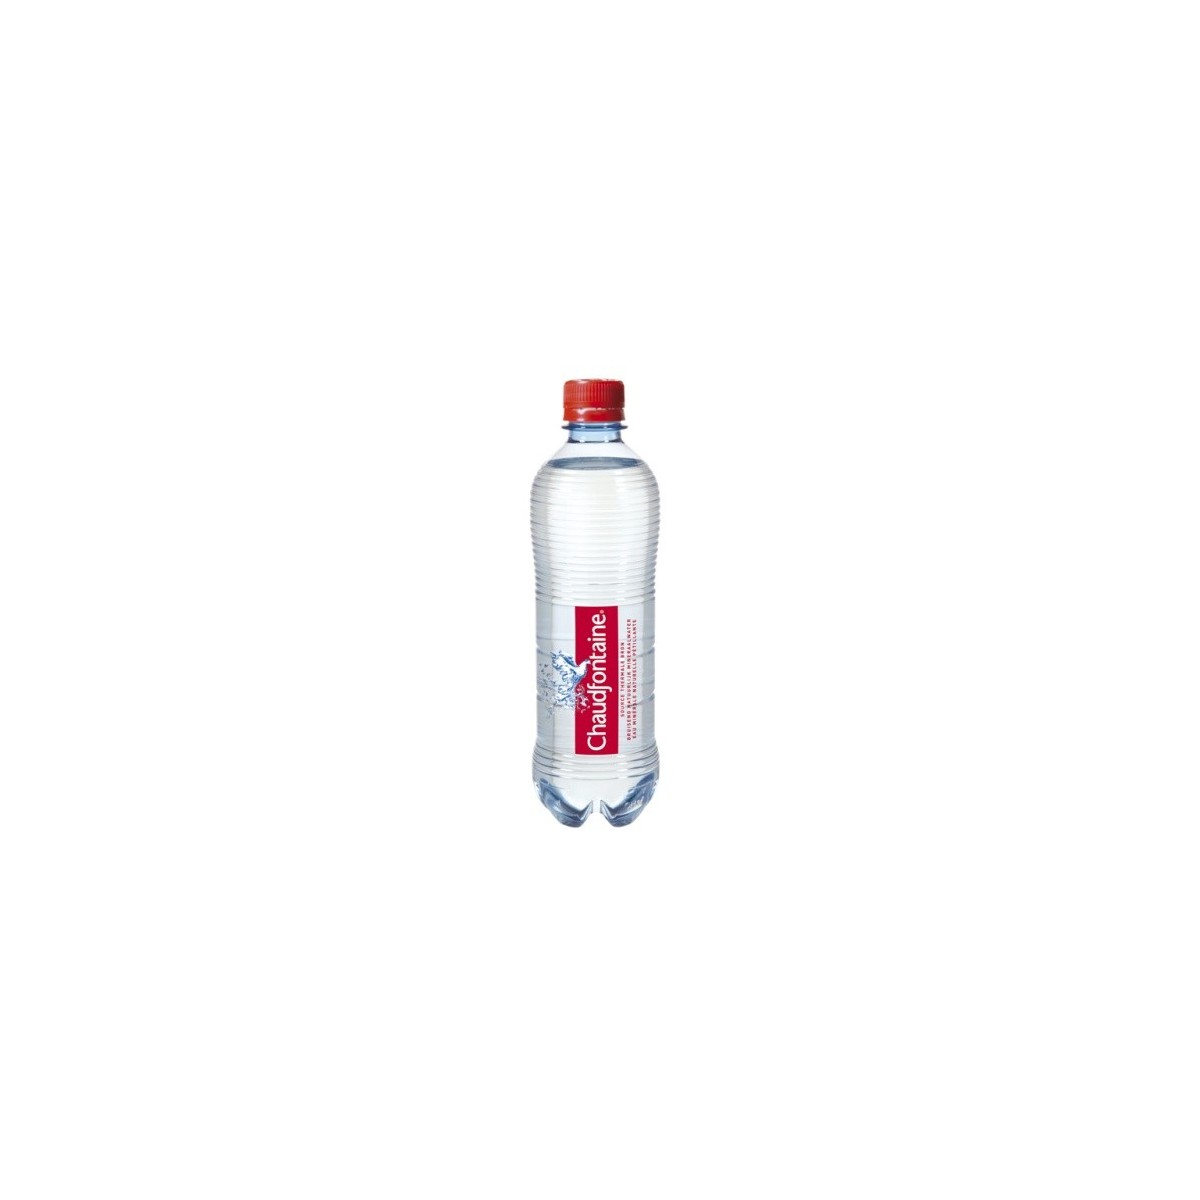 CHAUDFONTAINE SPARKLING WATER 24X50CL BOTTLE  TRAY